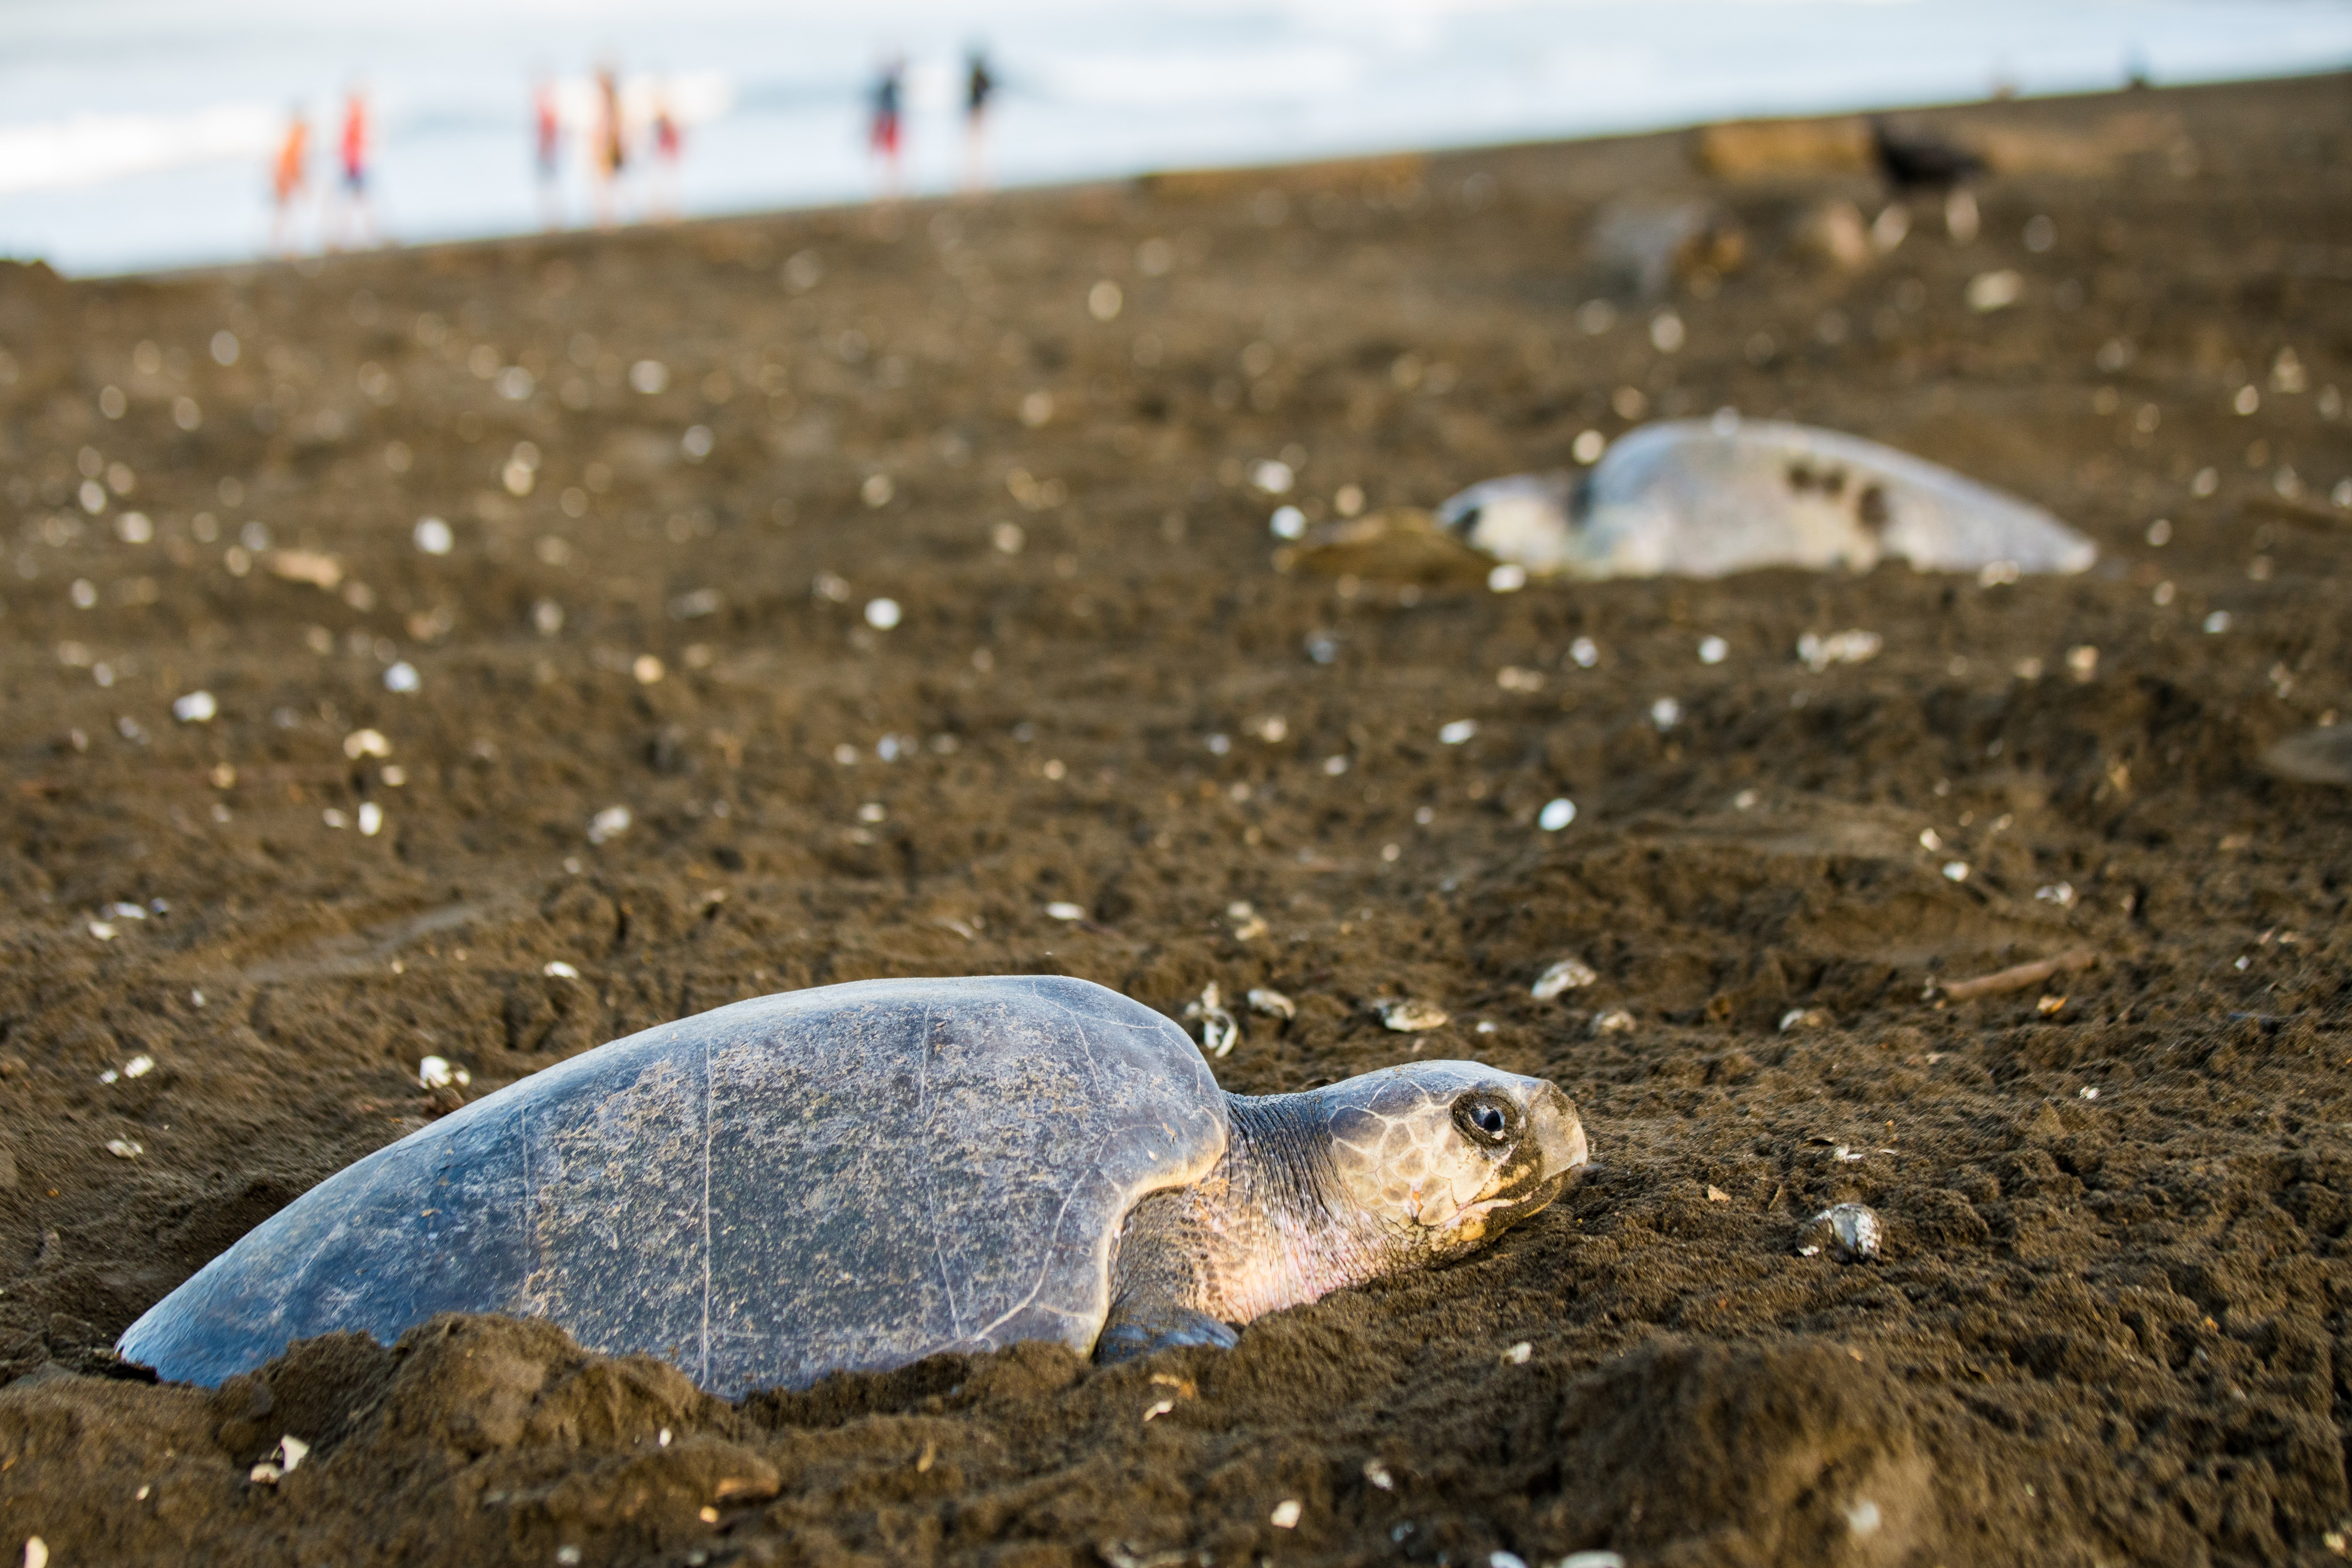 The most unusual group tours: Turtle rescue in Costa Rica.